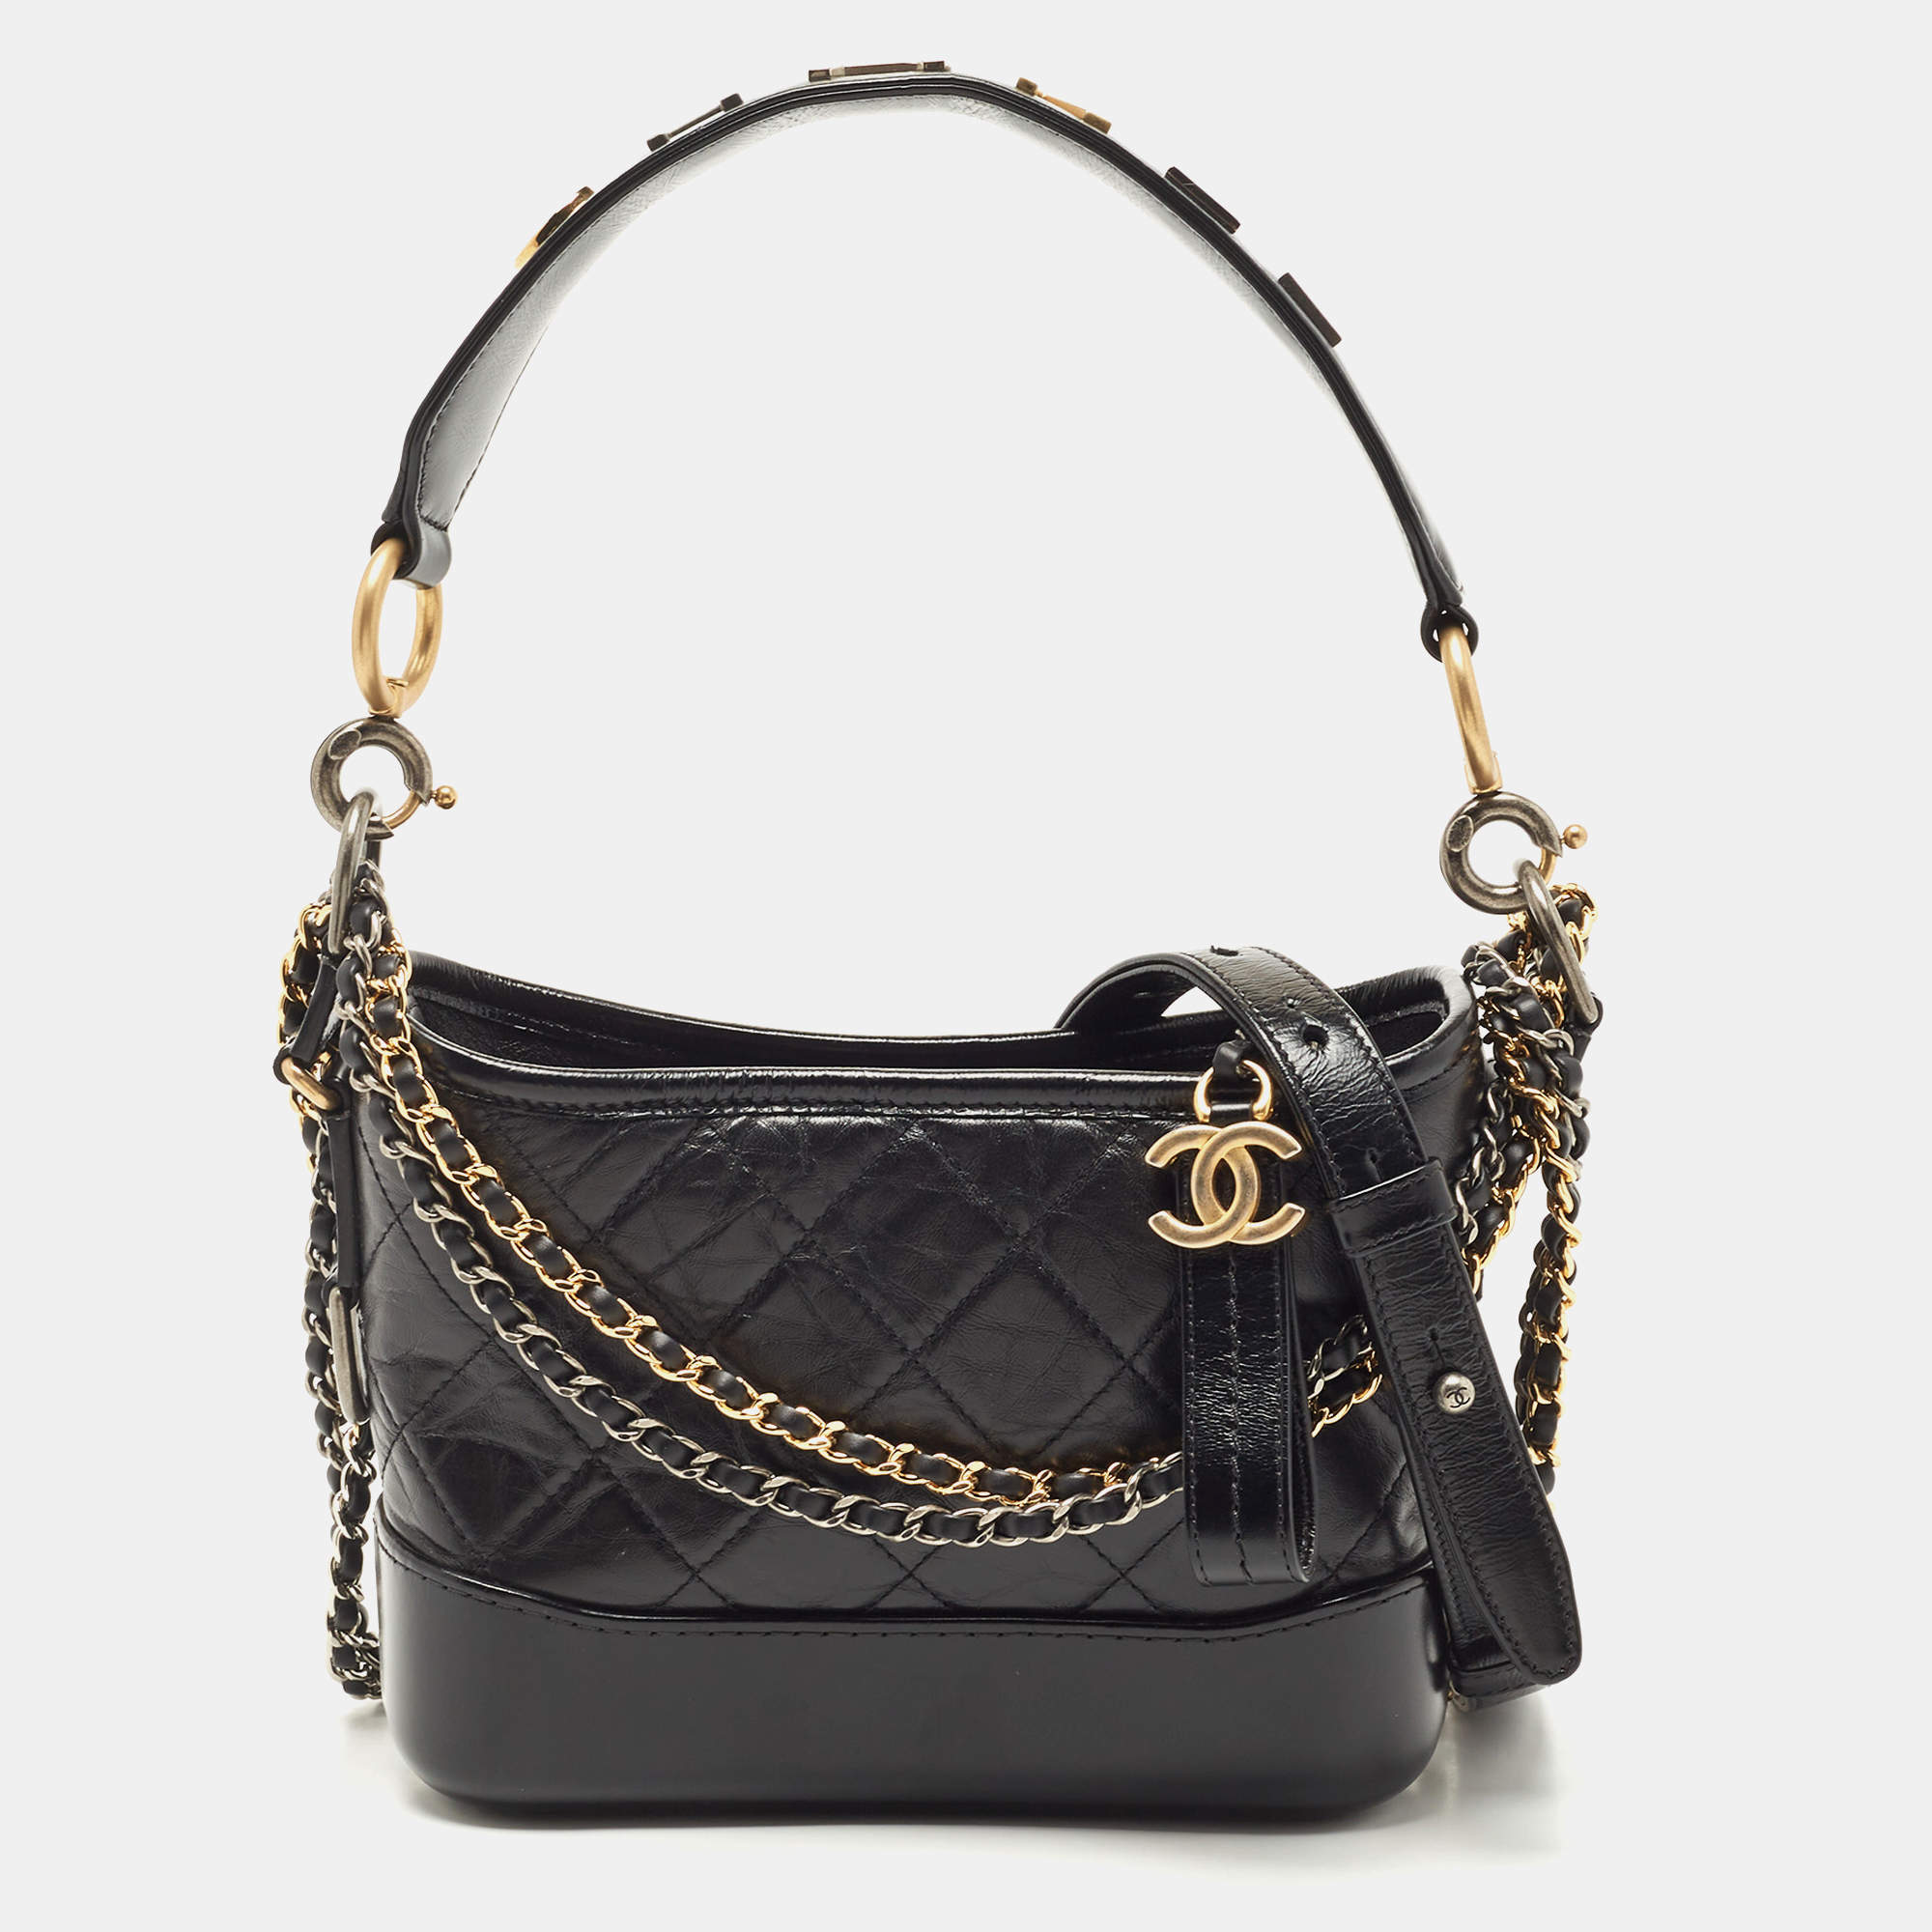 Chanel Black Quilted Aged Leather Small Gabrielle Hobo Chanel